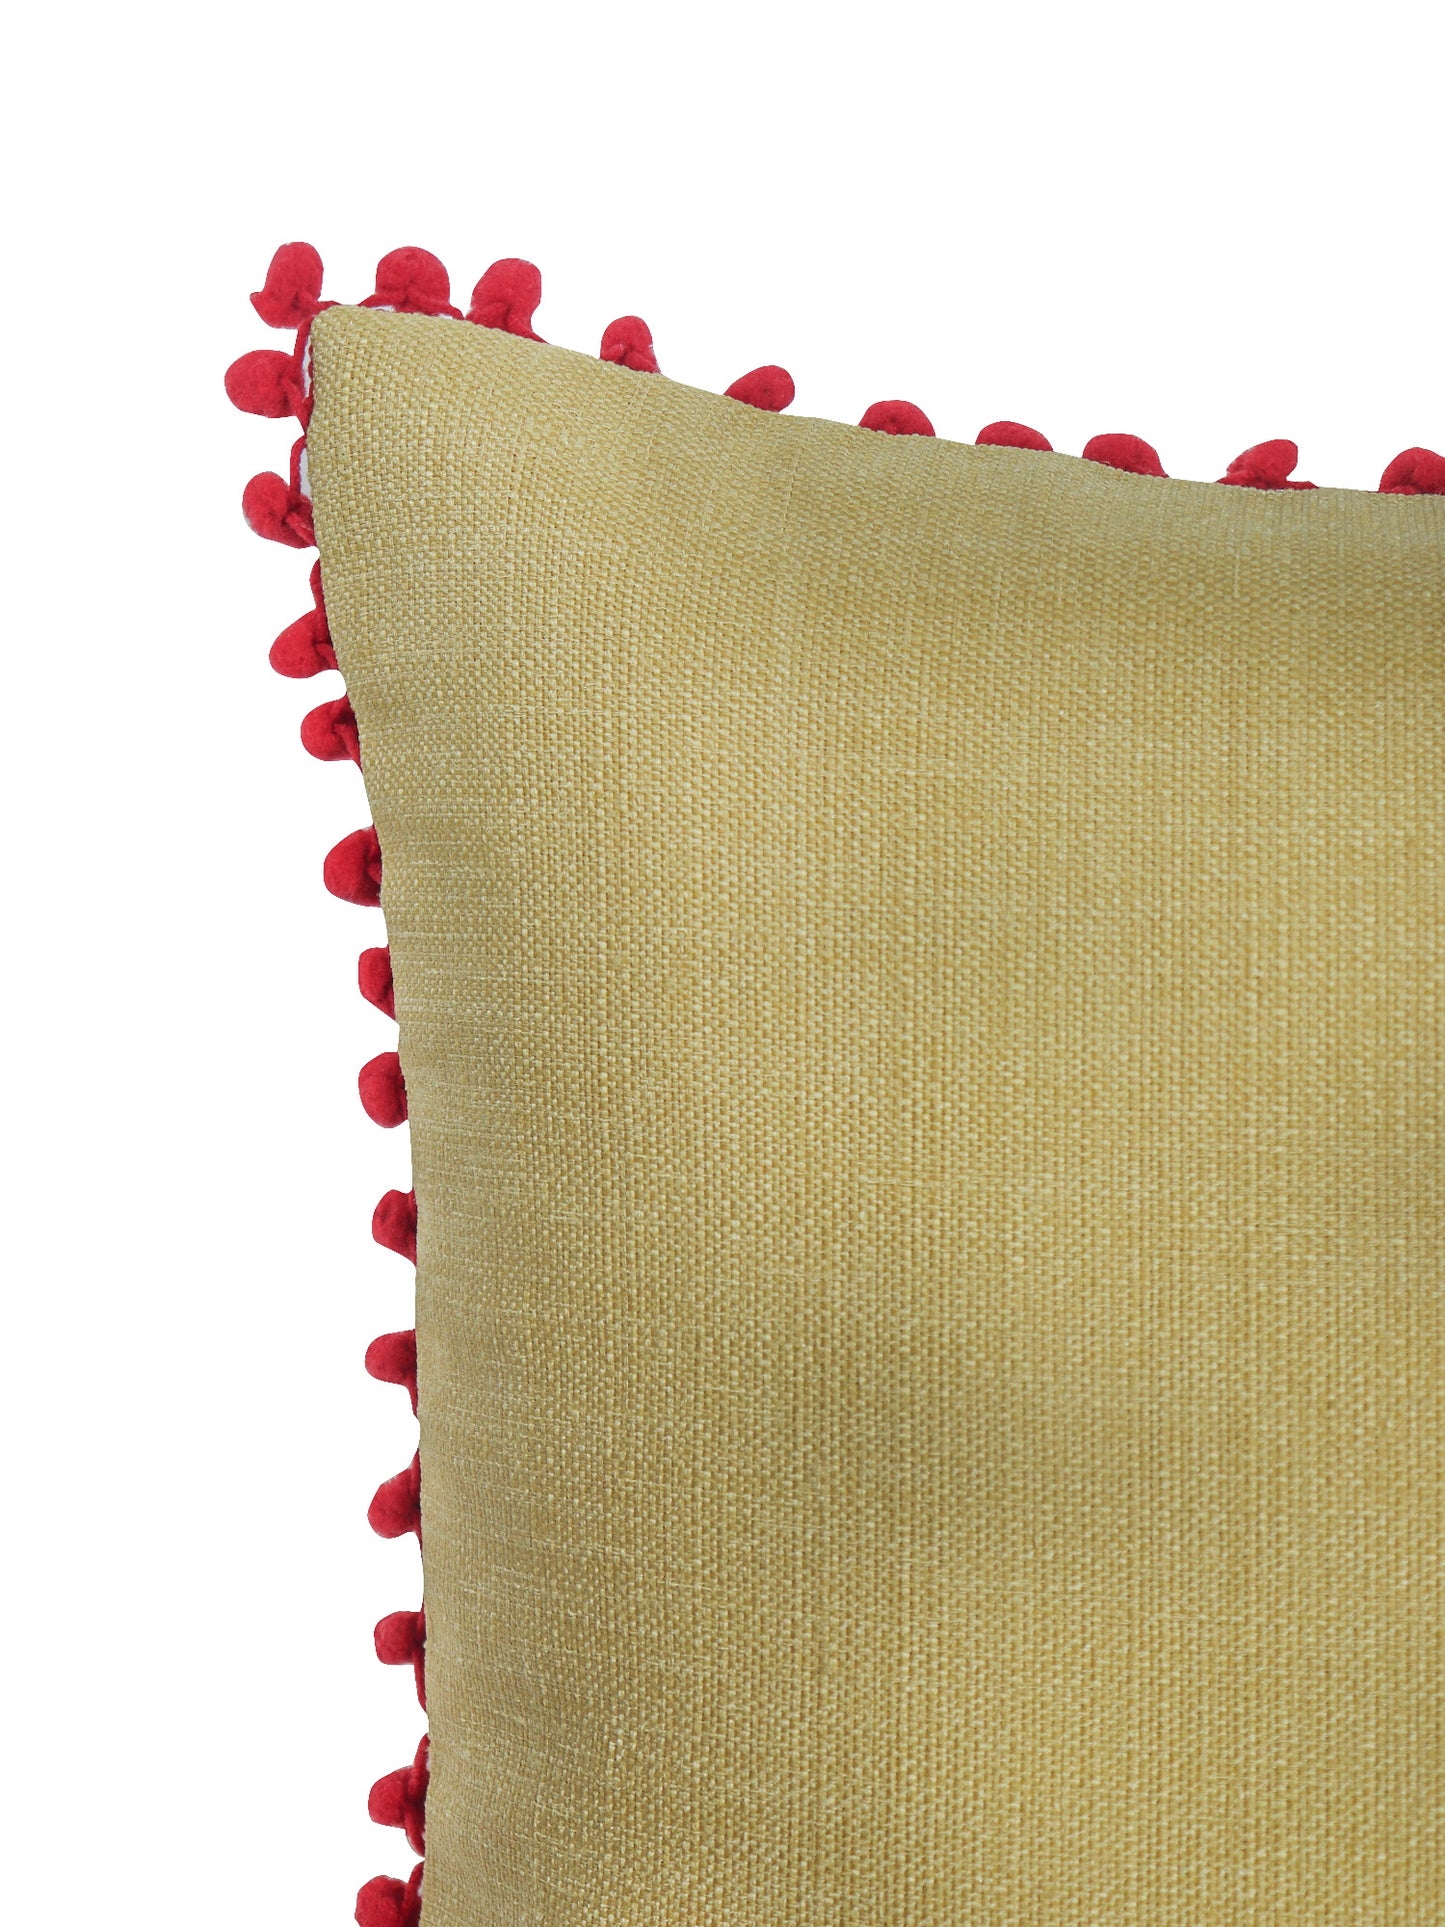 ZEBA World Square Cushion Cover for Sofa, Bed | Red Pompoms on Edges - Cotton Blend | Light Yellow - 16x16in(40x40cm) (Pack of 1)